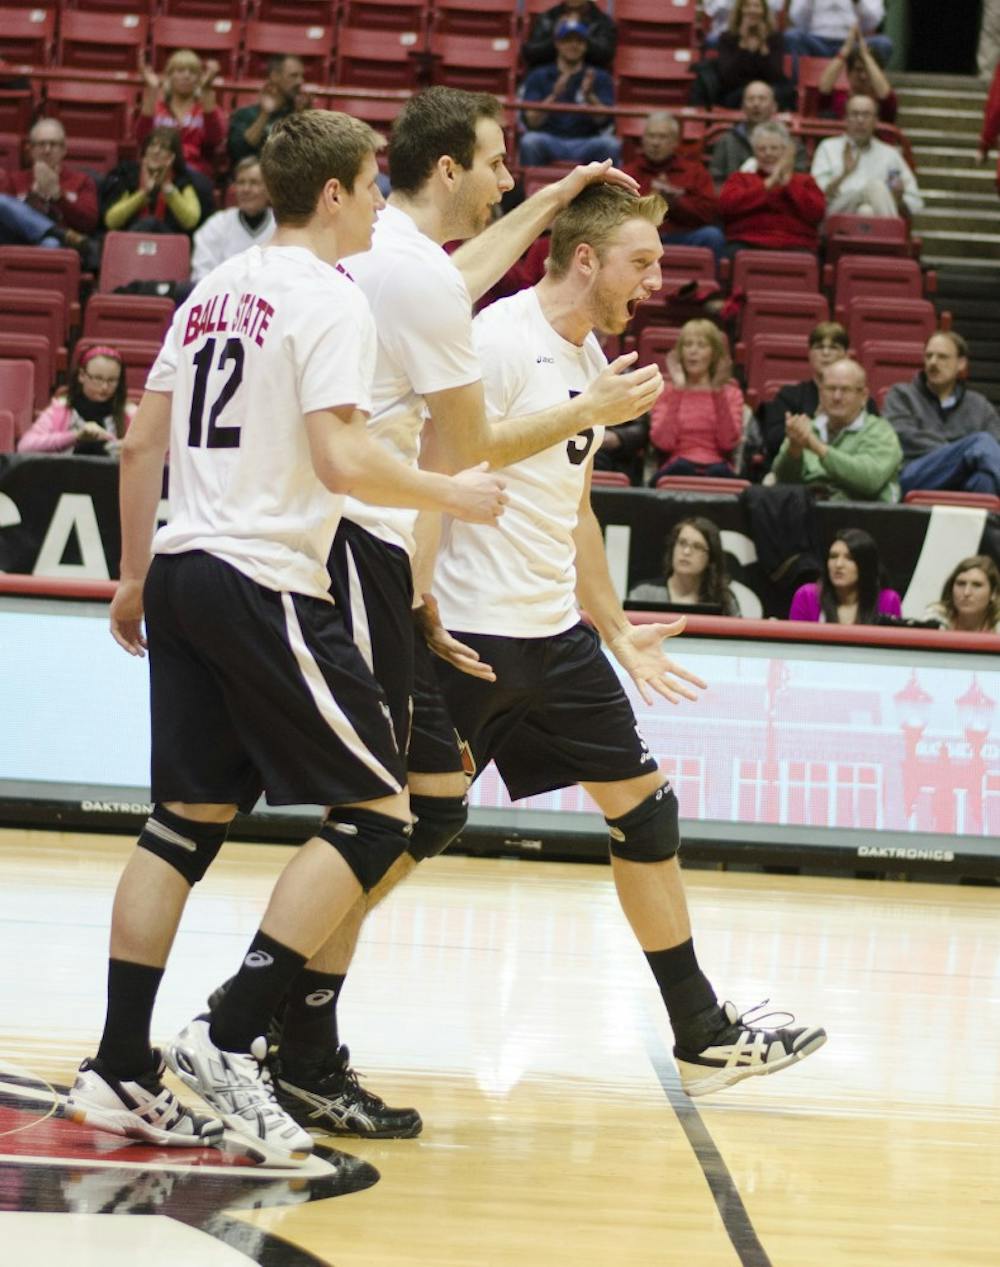 Senior outside attacker Matt Sutherland, senior middle attacker Matt Leske and senior setting Graham McIlvaine celebrate after getting a point in the first set against Mount Olive on March 1 at Worthen Arena. DN PHOTO BREANNA DAUGHERTY 